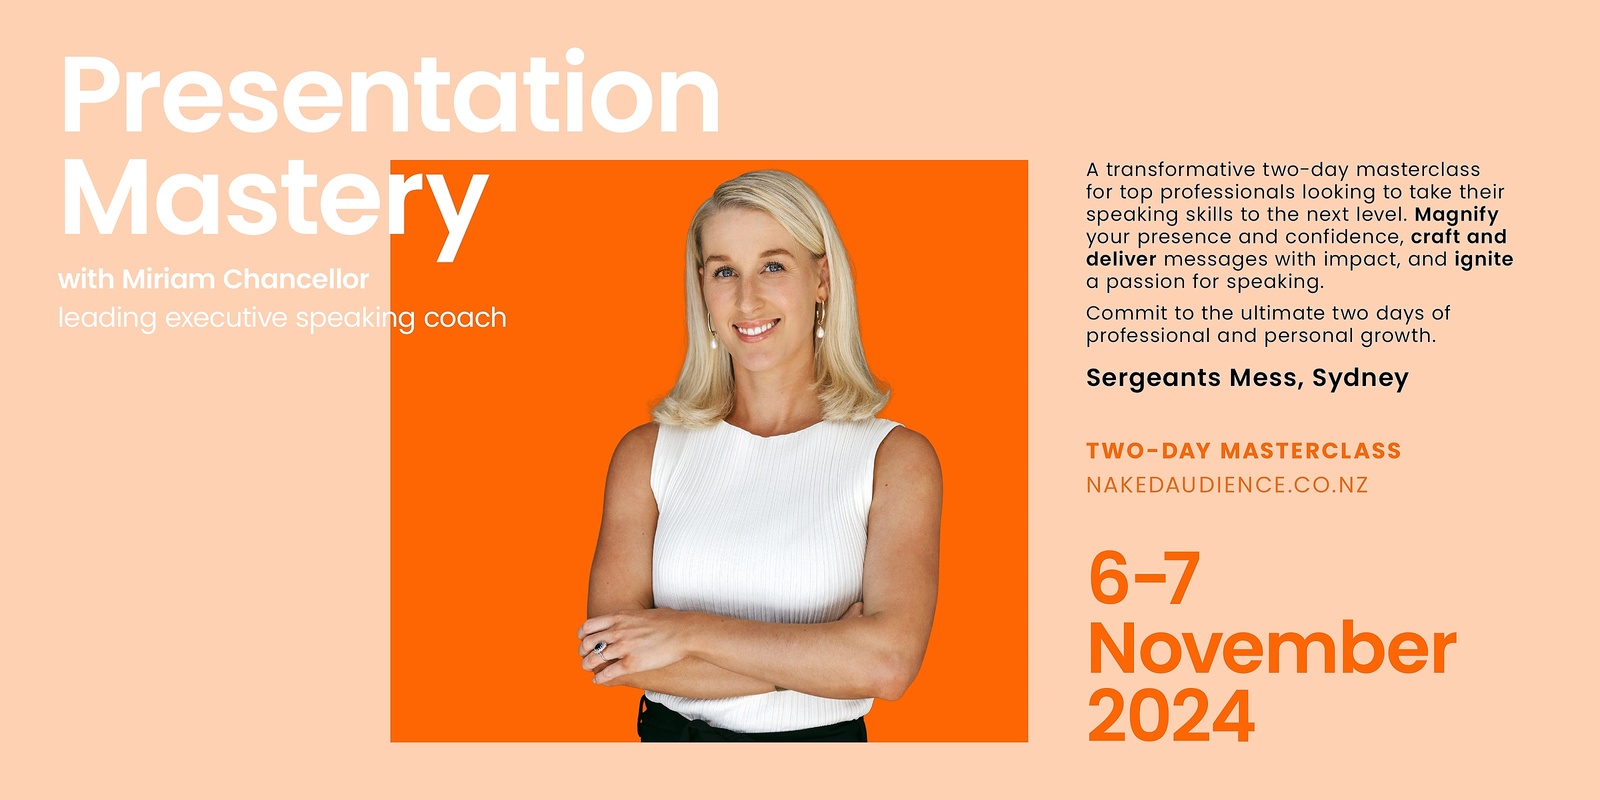 Banner image for (Sydney) Masterclass in Presentation Mastery with Miriam Chancellor